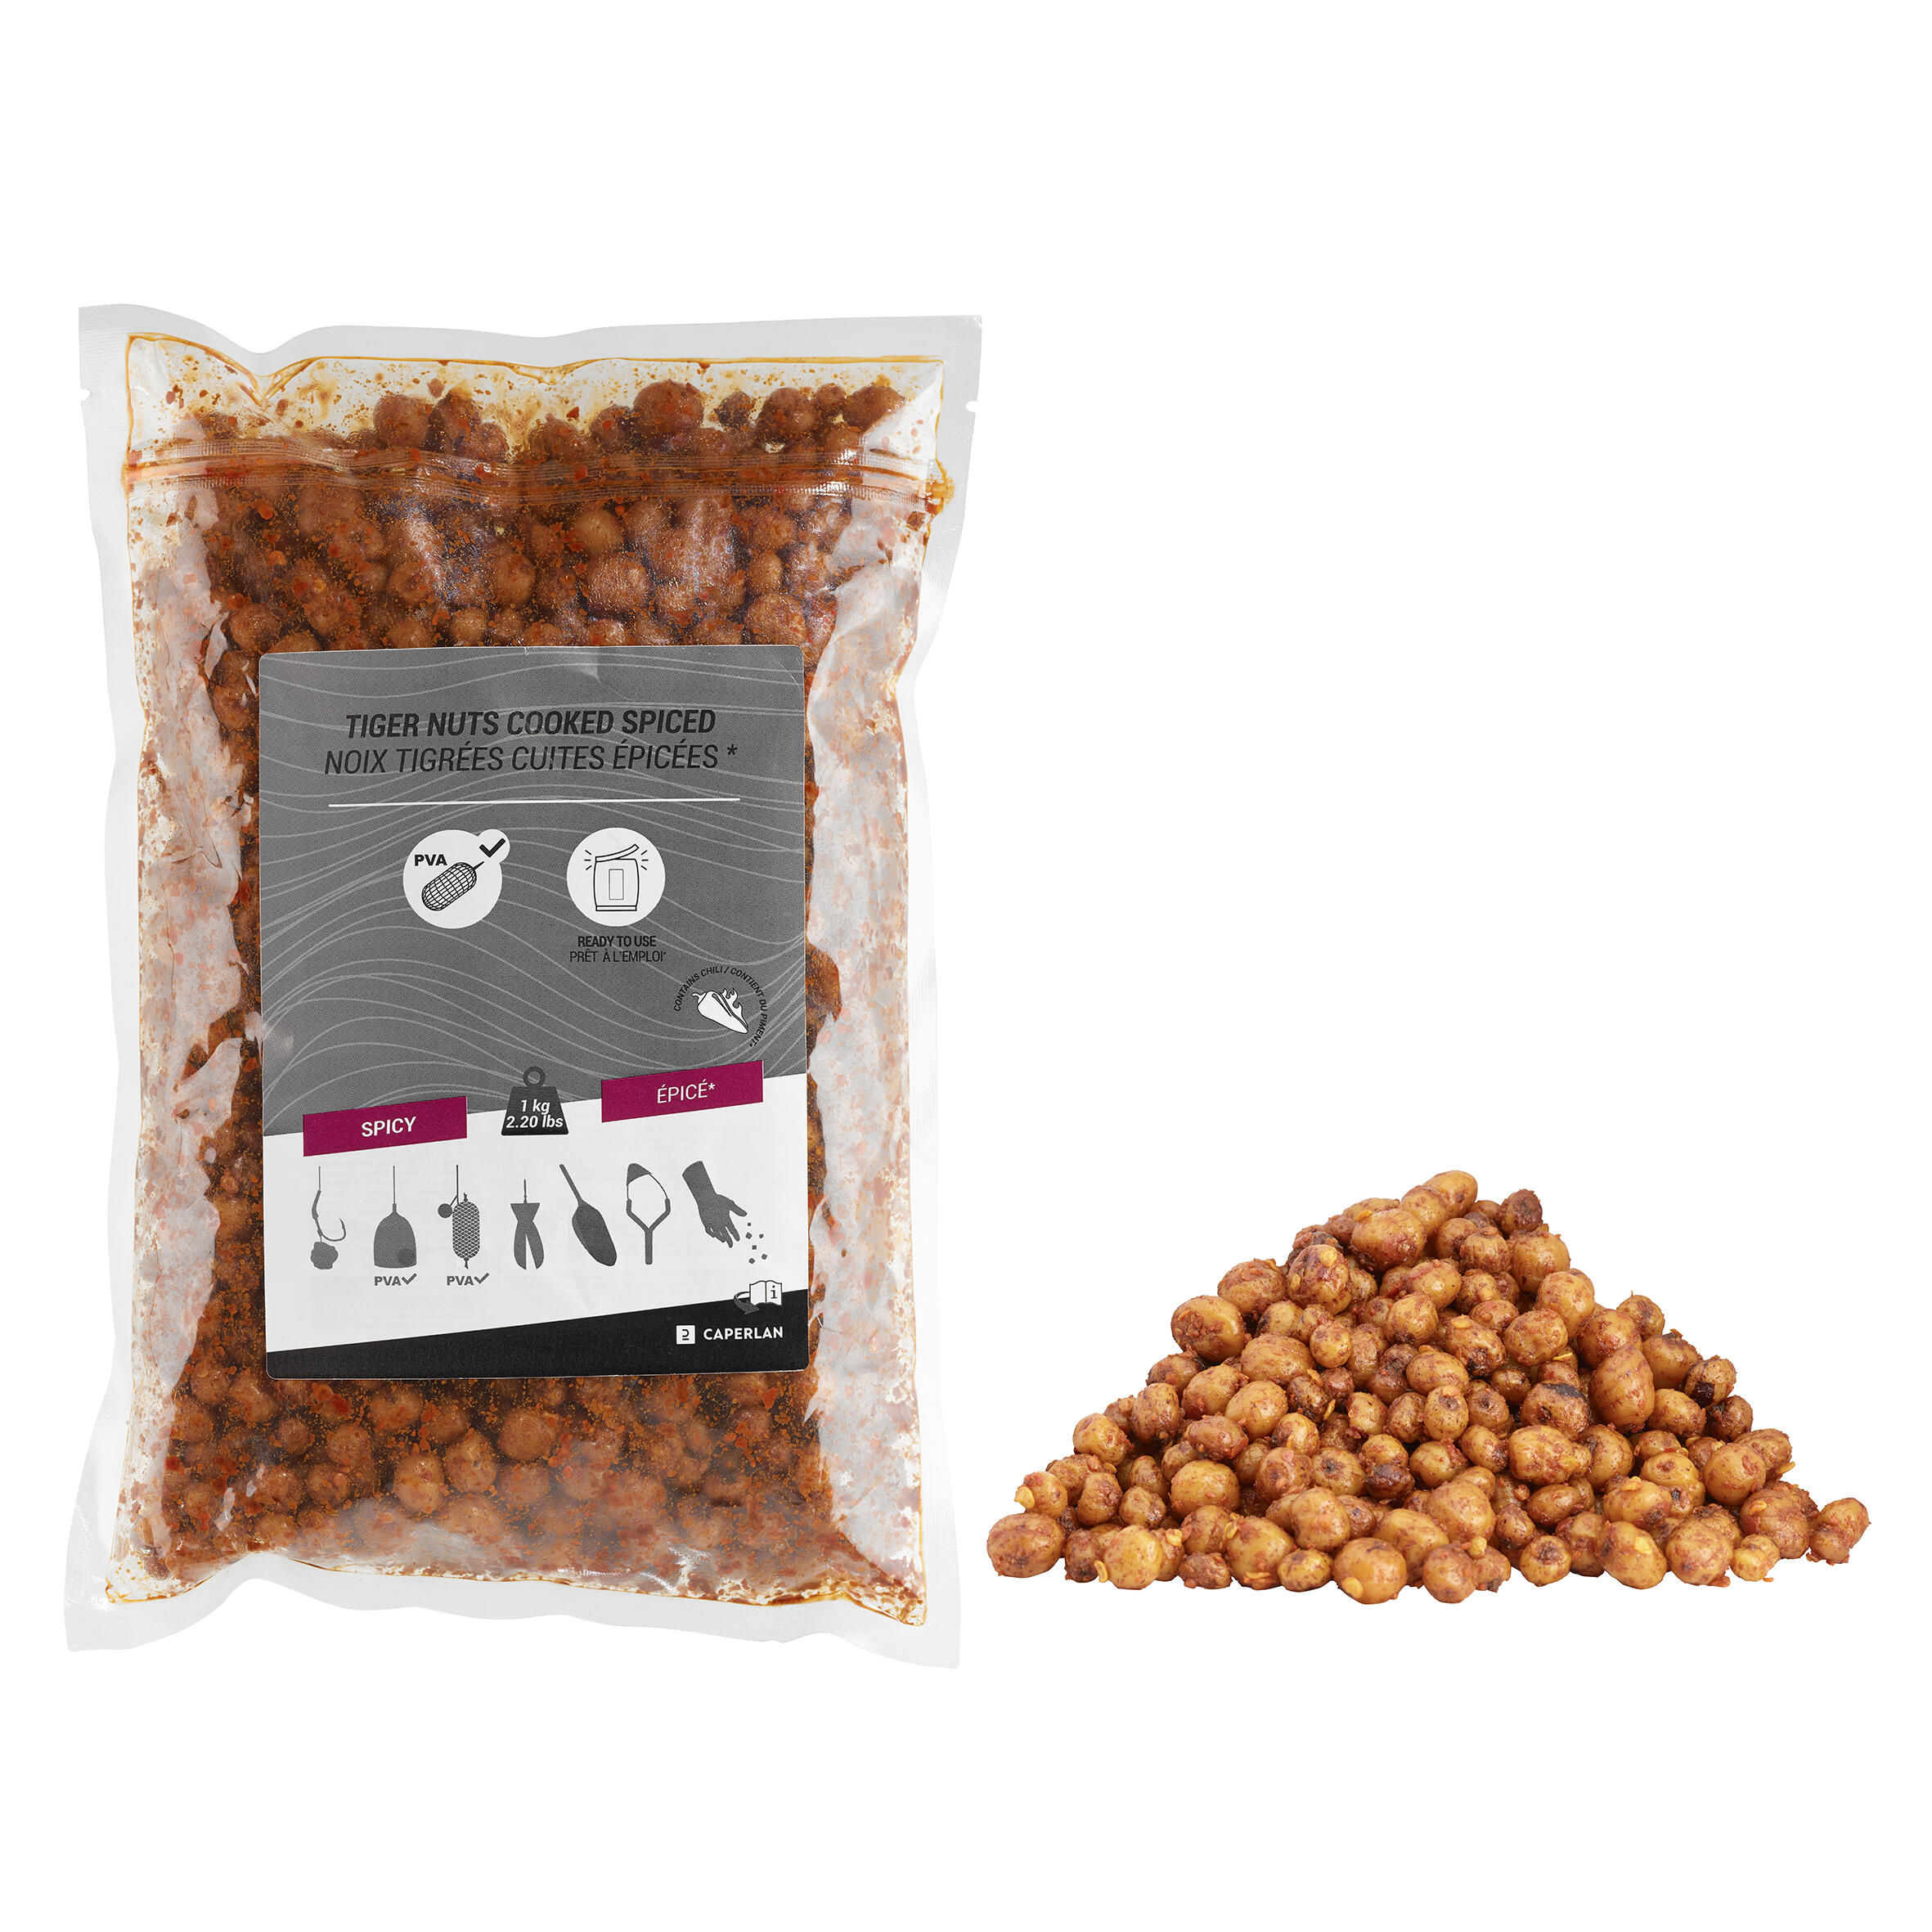 Carp fishing cooked and spiced tiger nut seeds 1kg 1/3